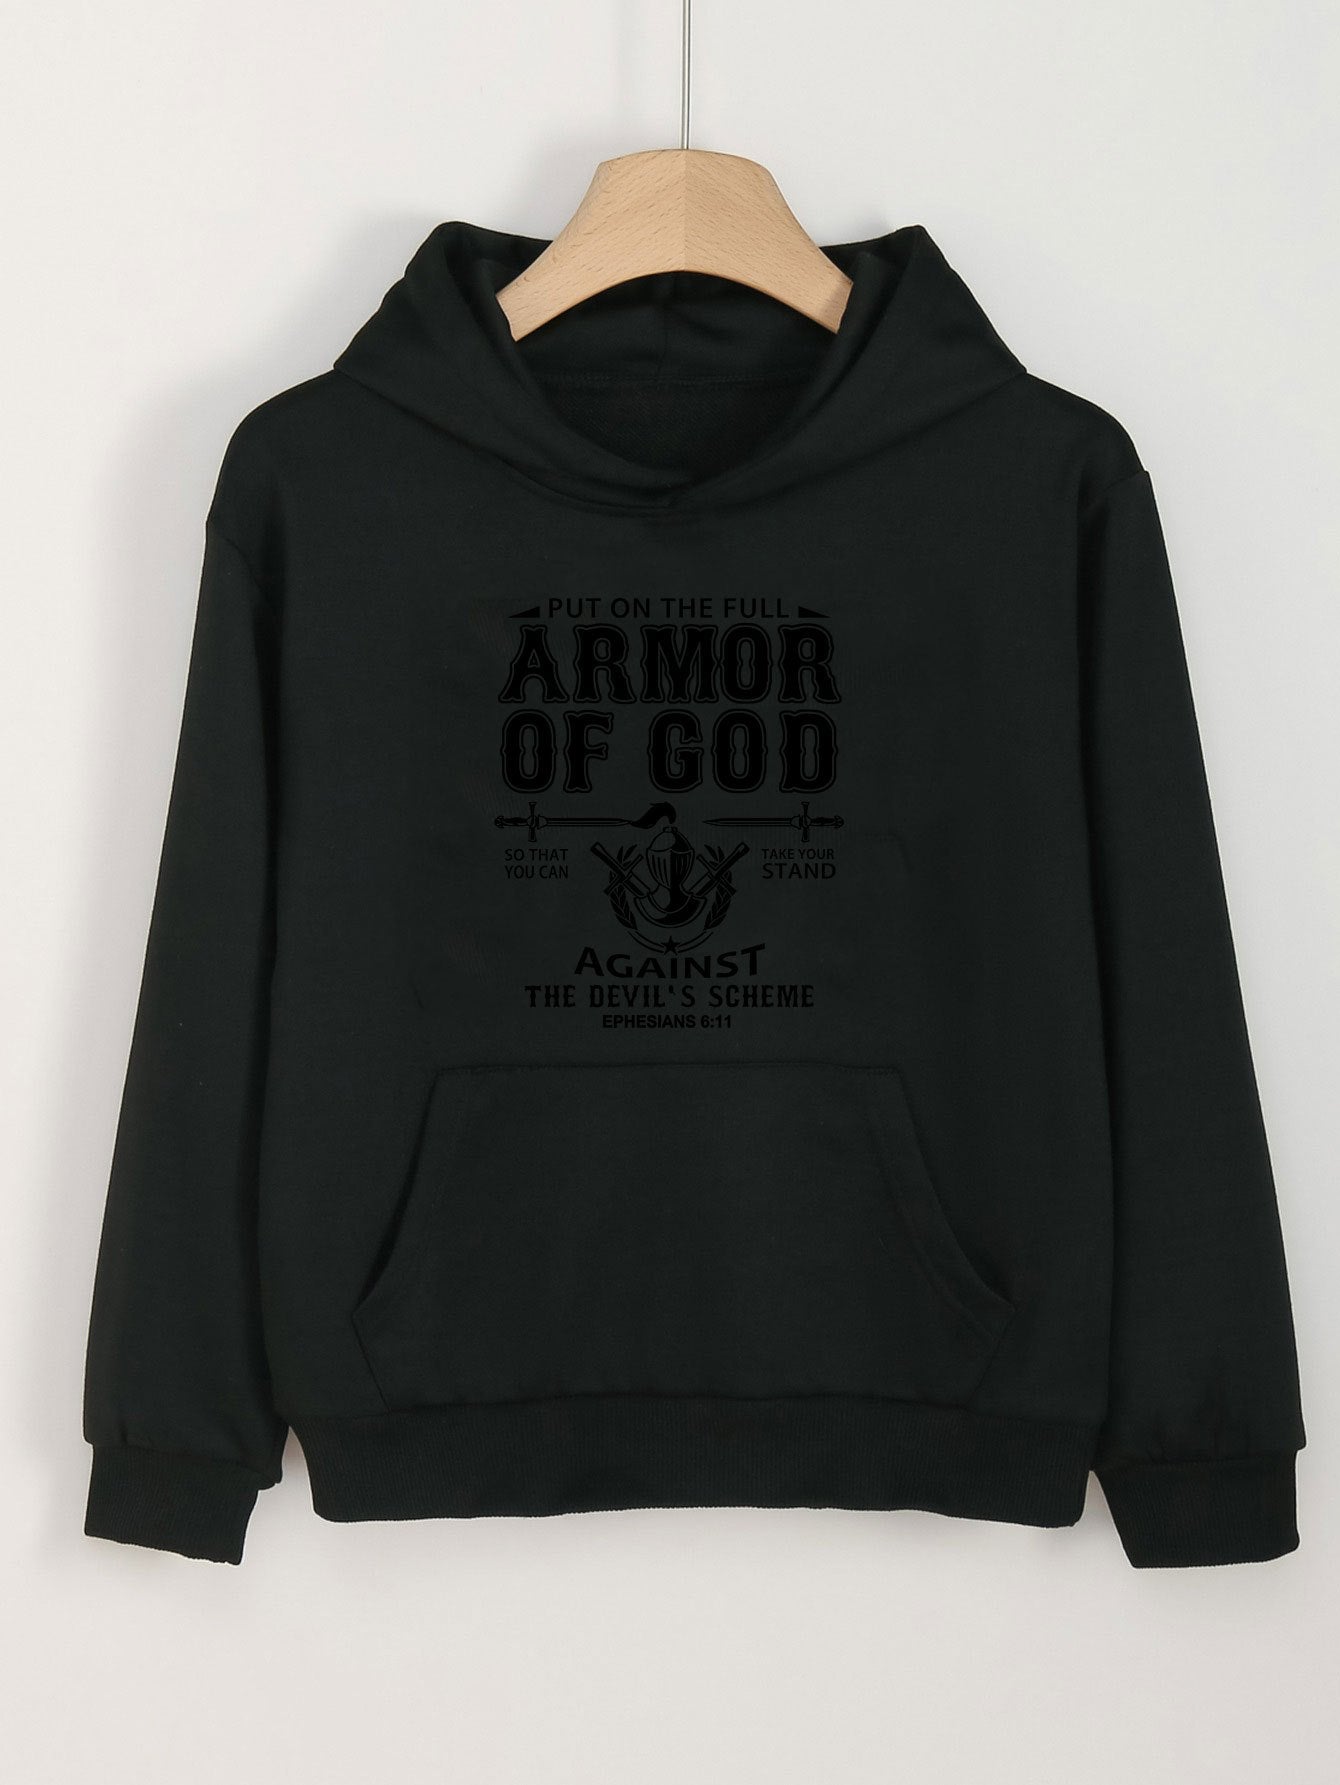 Put On The Full Armor Of God Youth Christian Pullover Hooded Sweatshirt claimedbygoddesigns